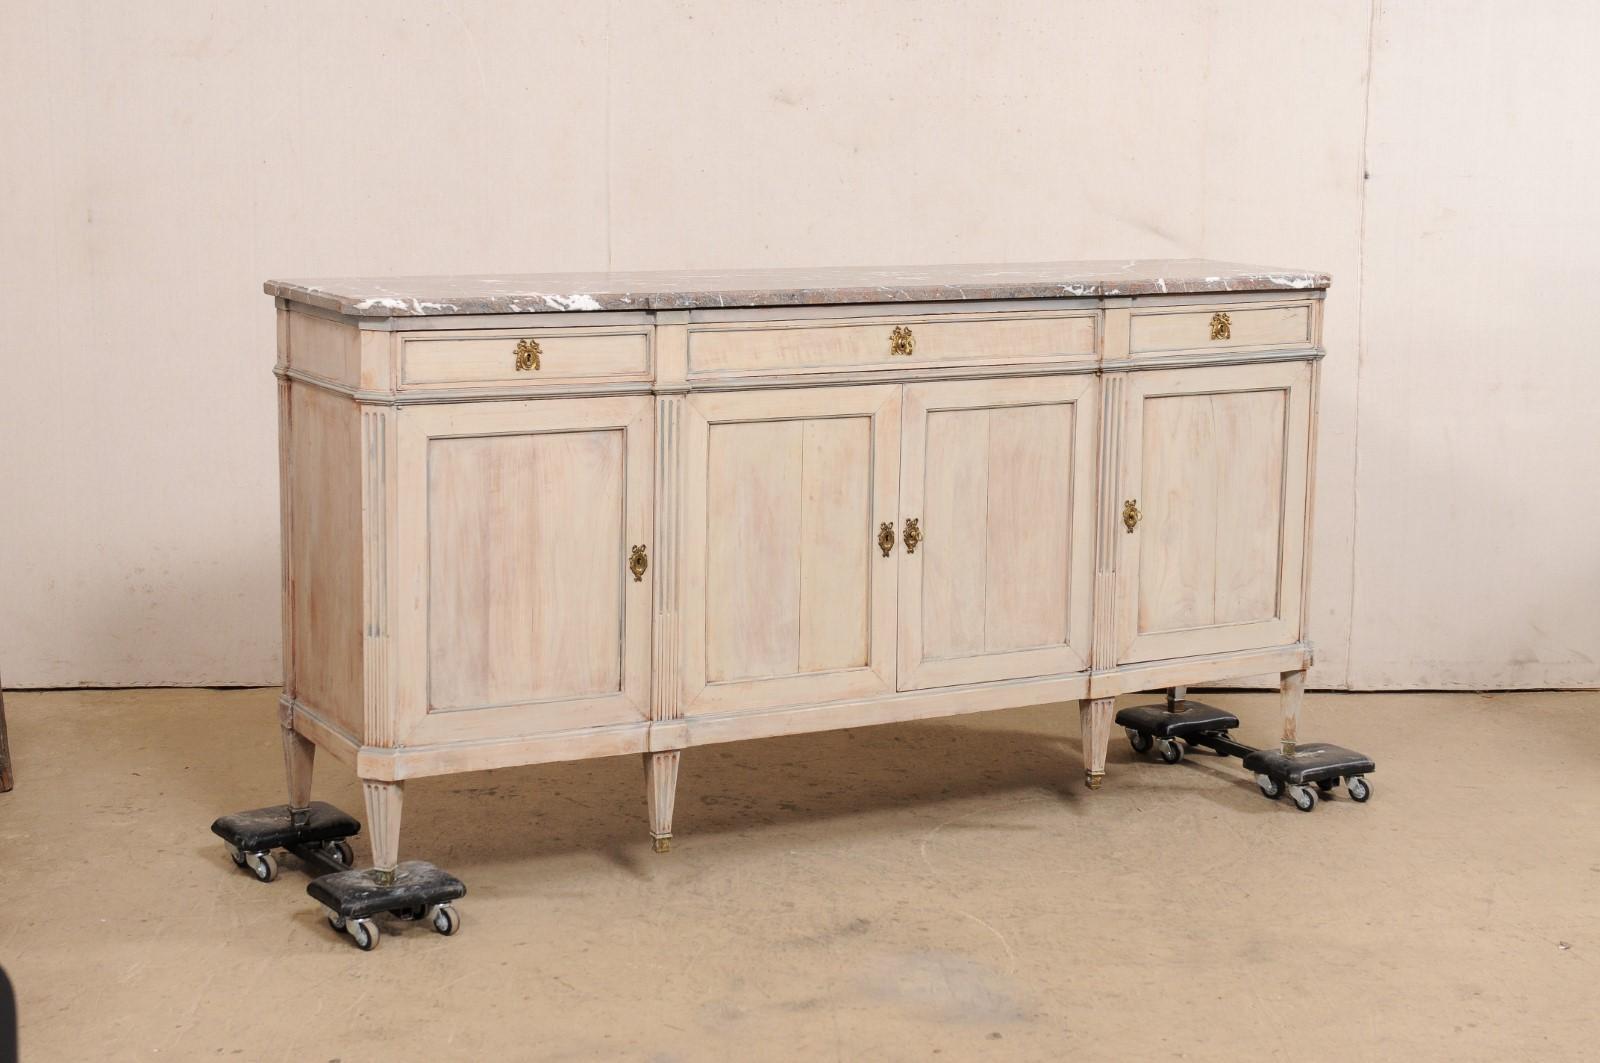 A French wooden sideboard, with flute-carved accents and original marble top, from the late 19th to early 20th century. This antique buffet console from France has a marble top with canted front corners and a pair of outward notched accents at front